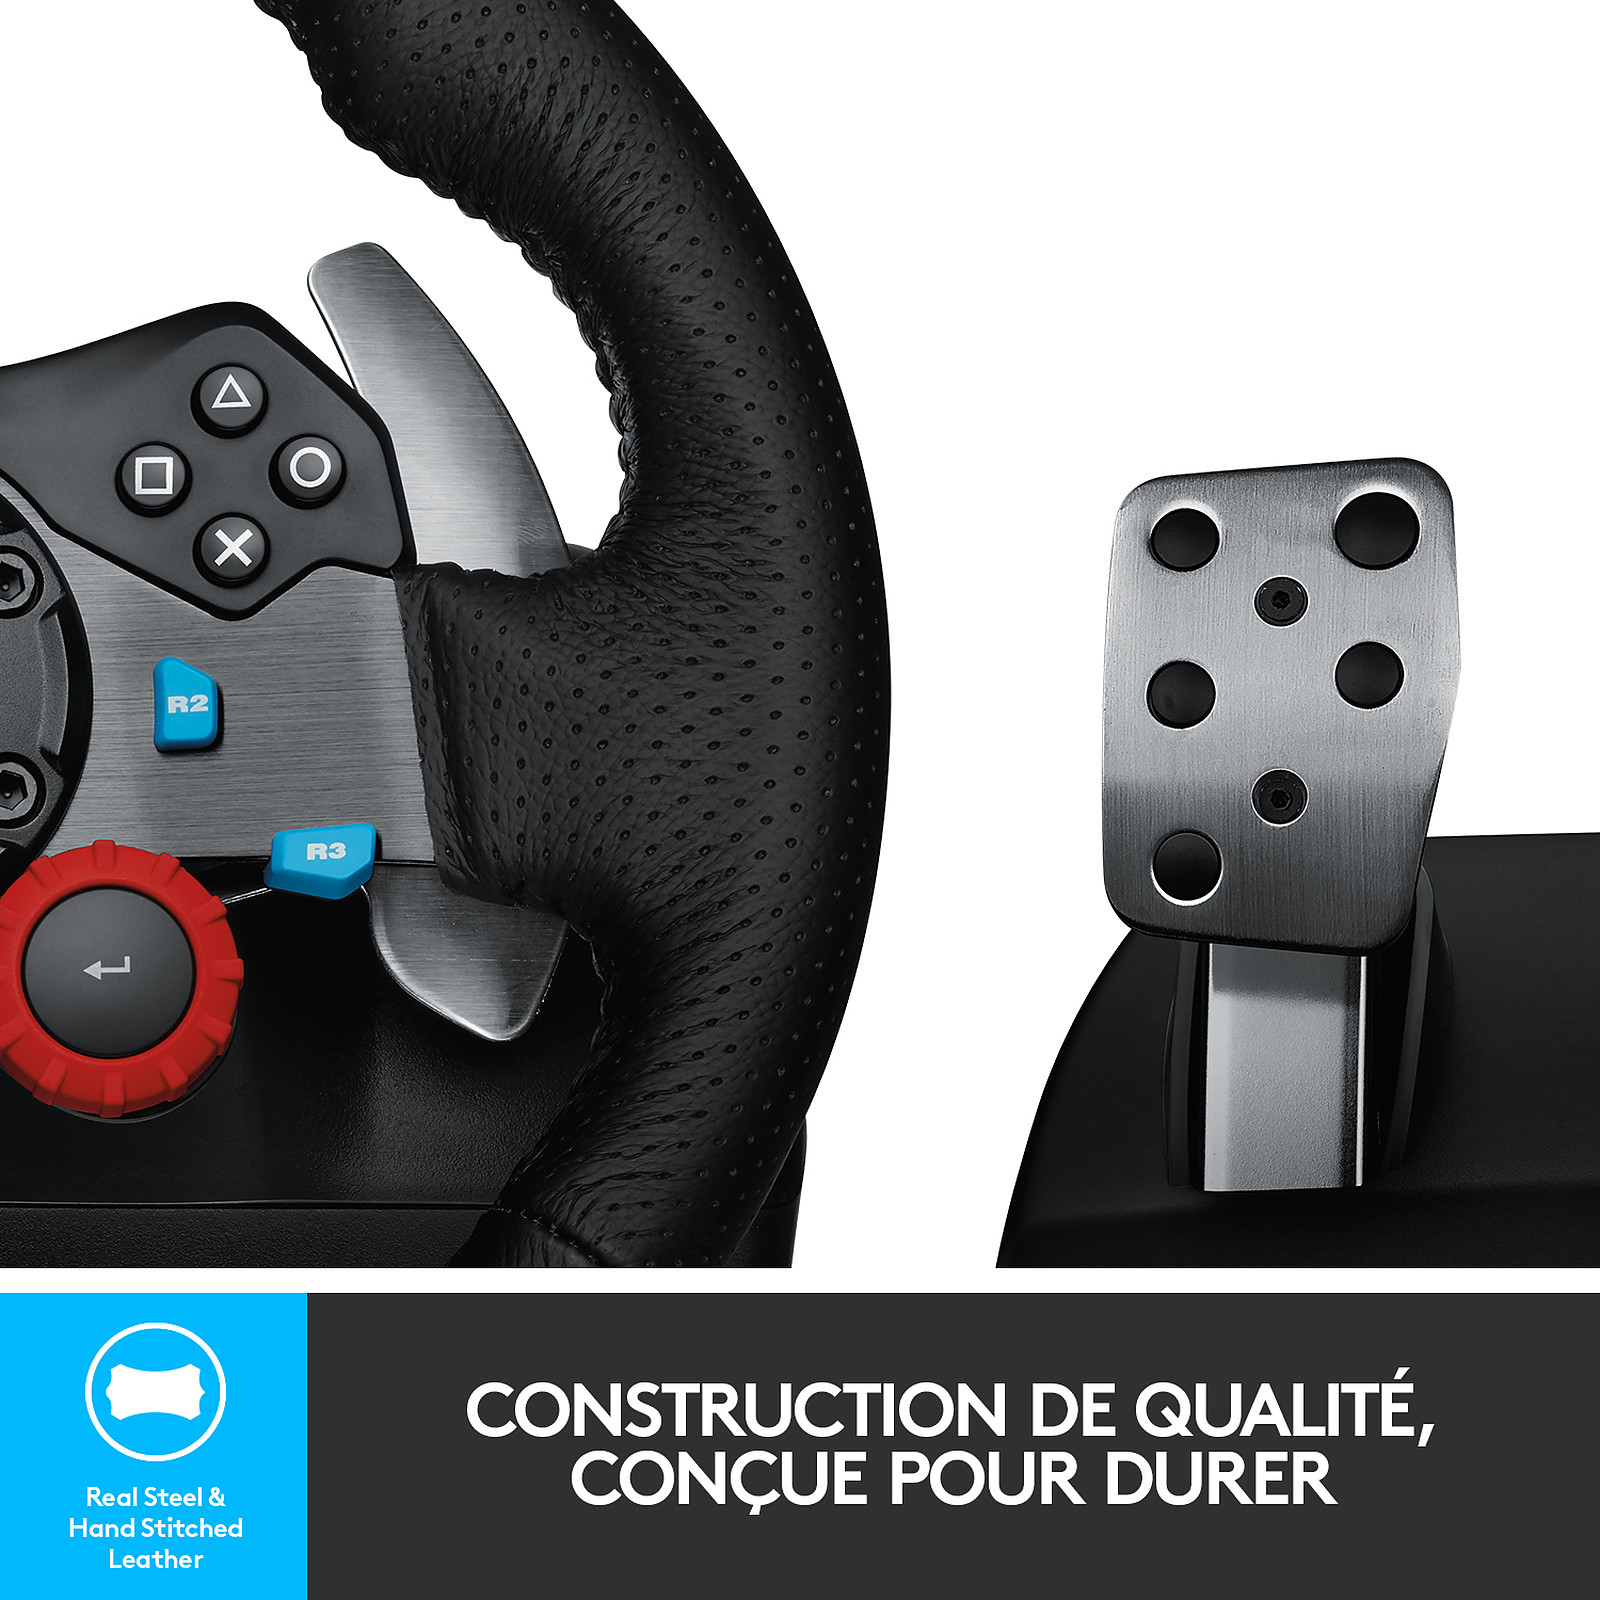 Playstation 5 + 2 Manettes + Volant Logitech G29 + Driving Force Shifter